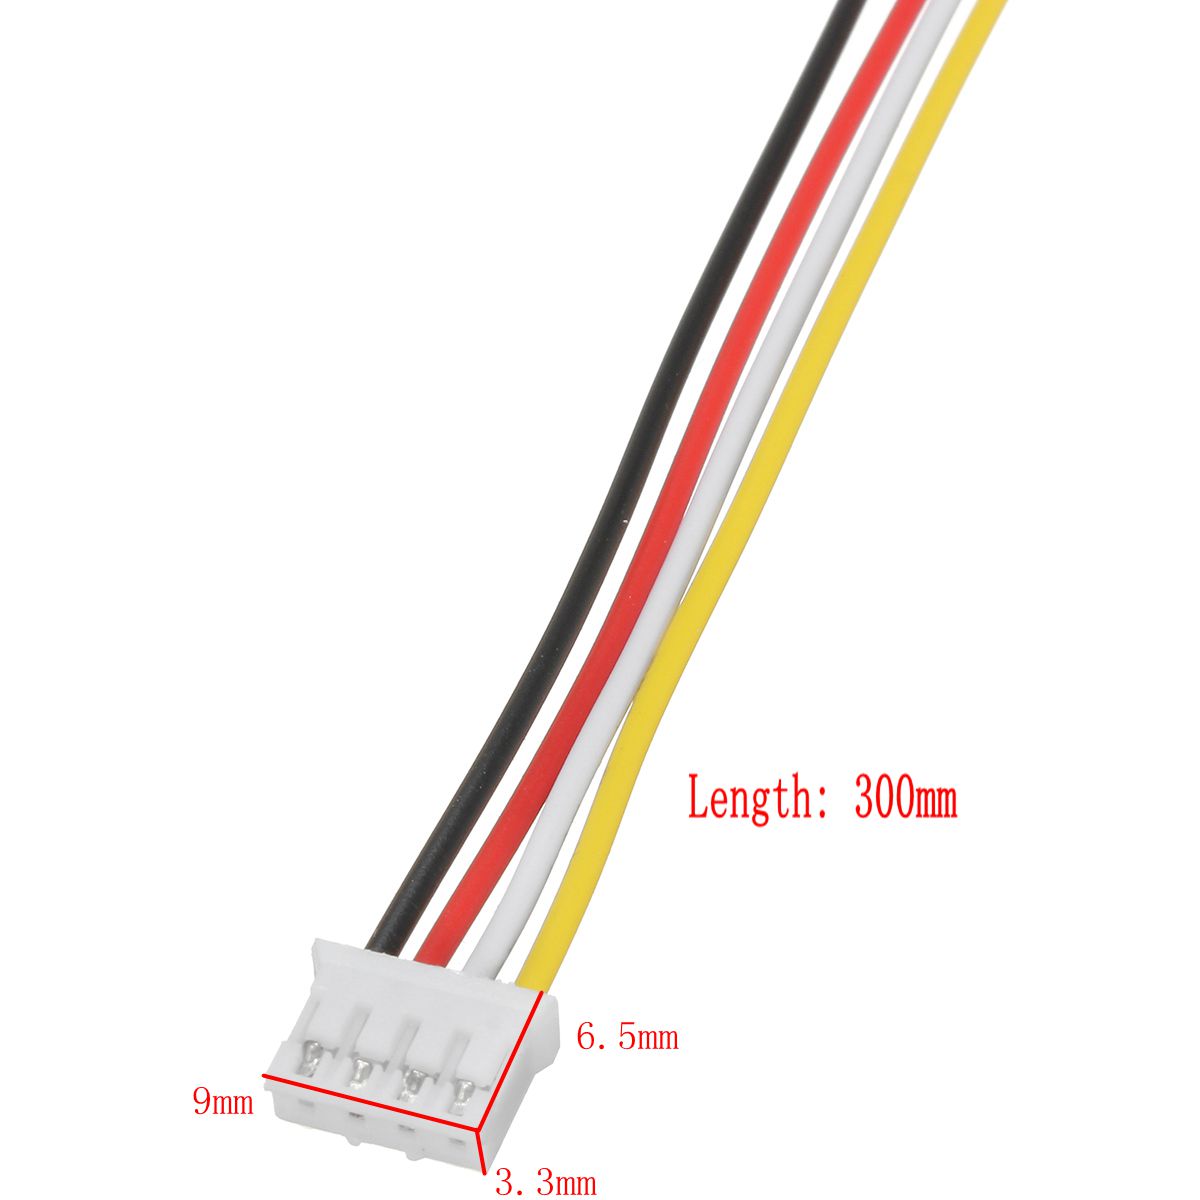 Excellwayreg-10-Sets-Mini-JST-20mm-PH-4Pin-26AWG-Male-Female-Connector-Plug-Wire-Cables-300mm-1195966-8